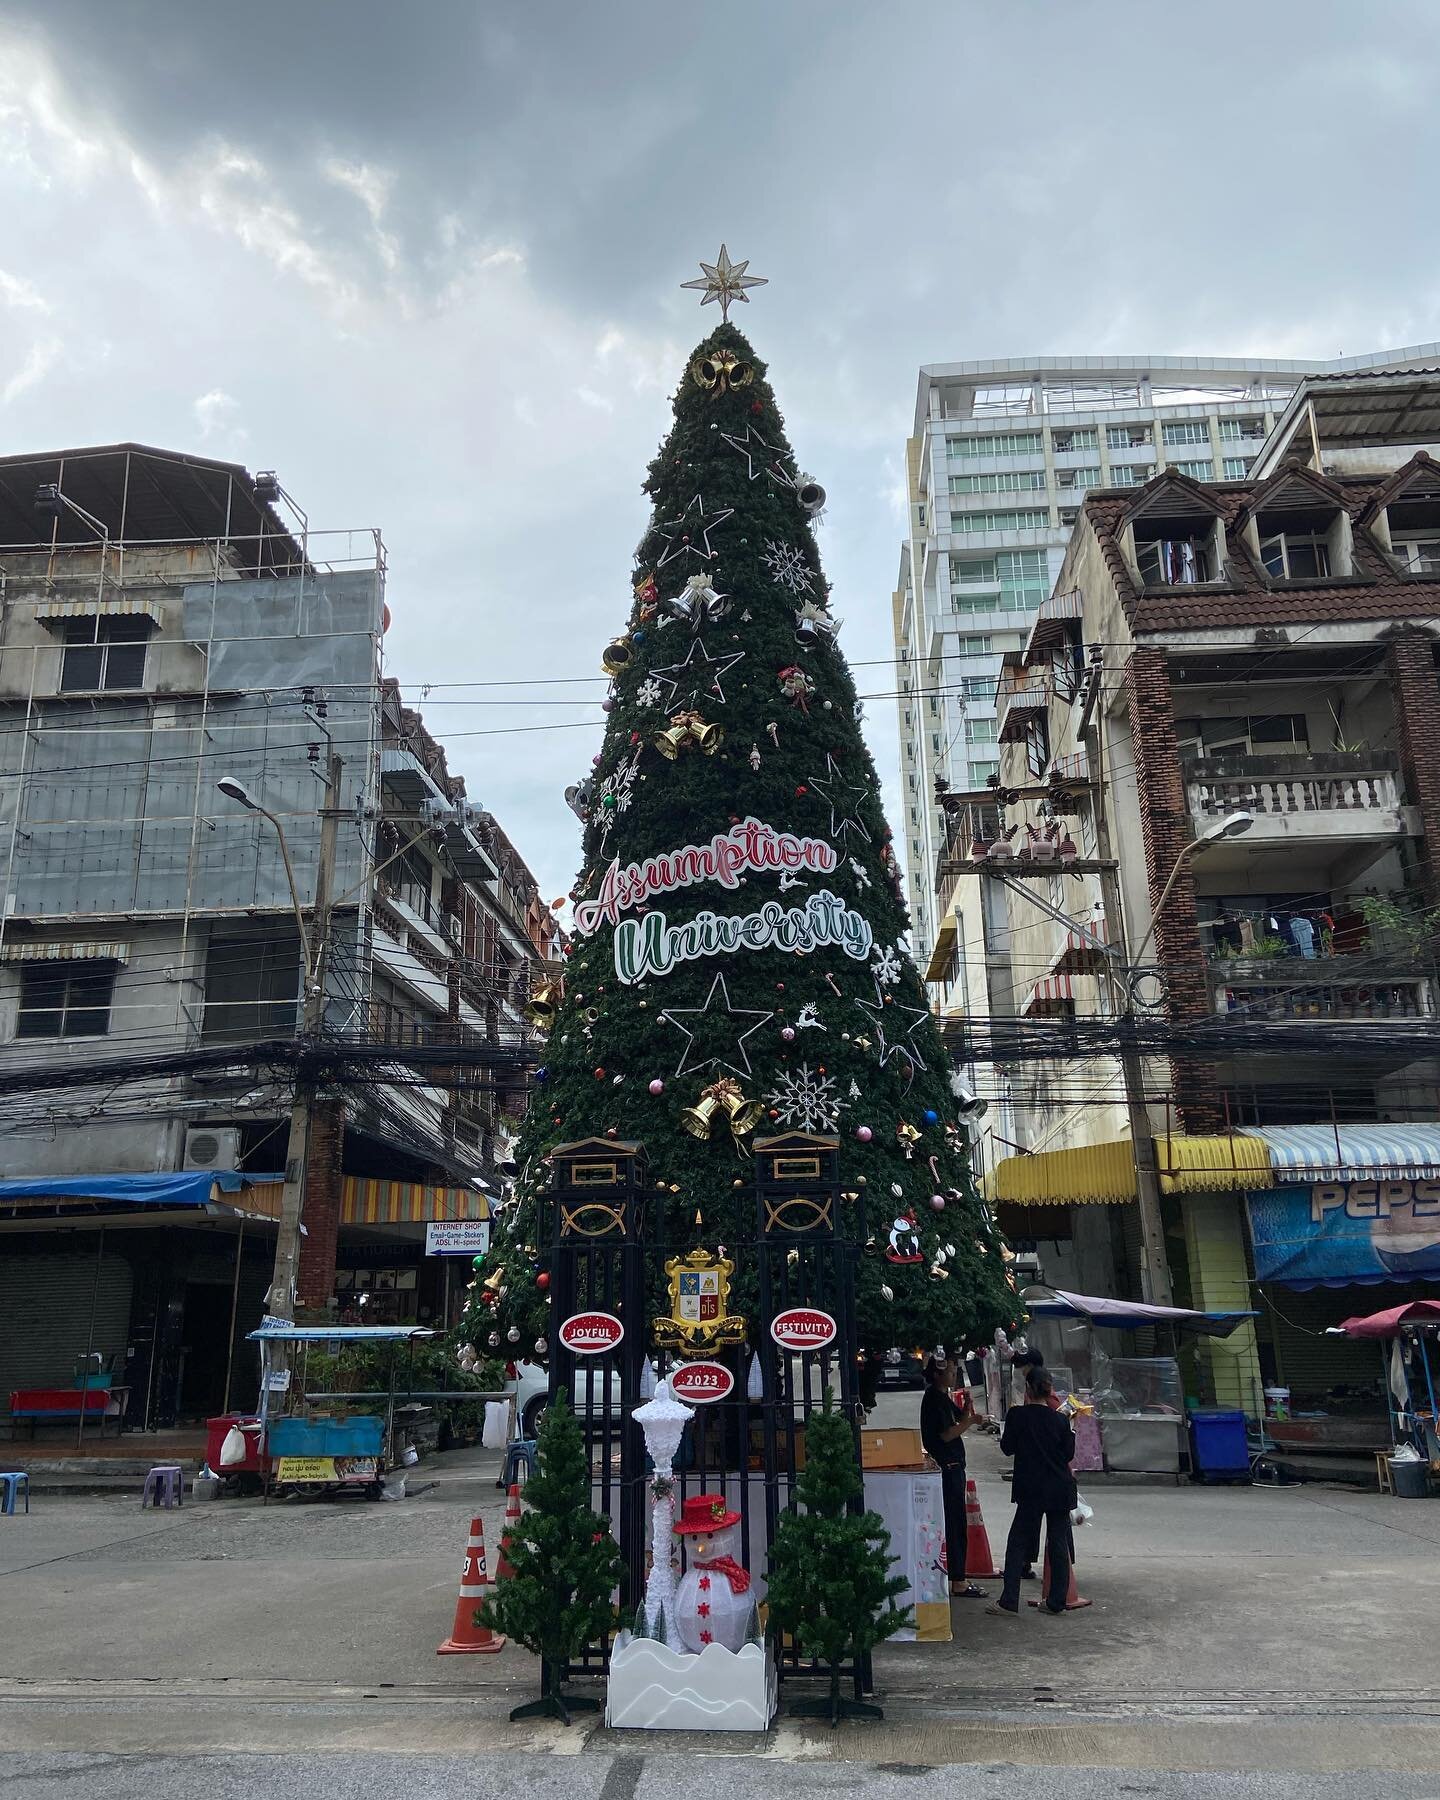 This is becoming an annual post, but, important to note the instantaneous joy and warmth that spreads across the land when they erect this mighty tree near our office.